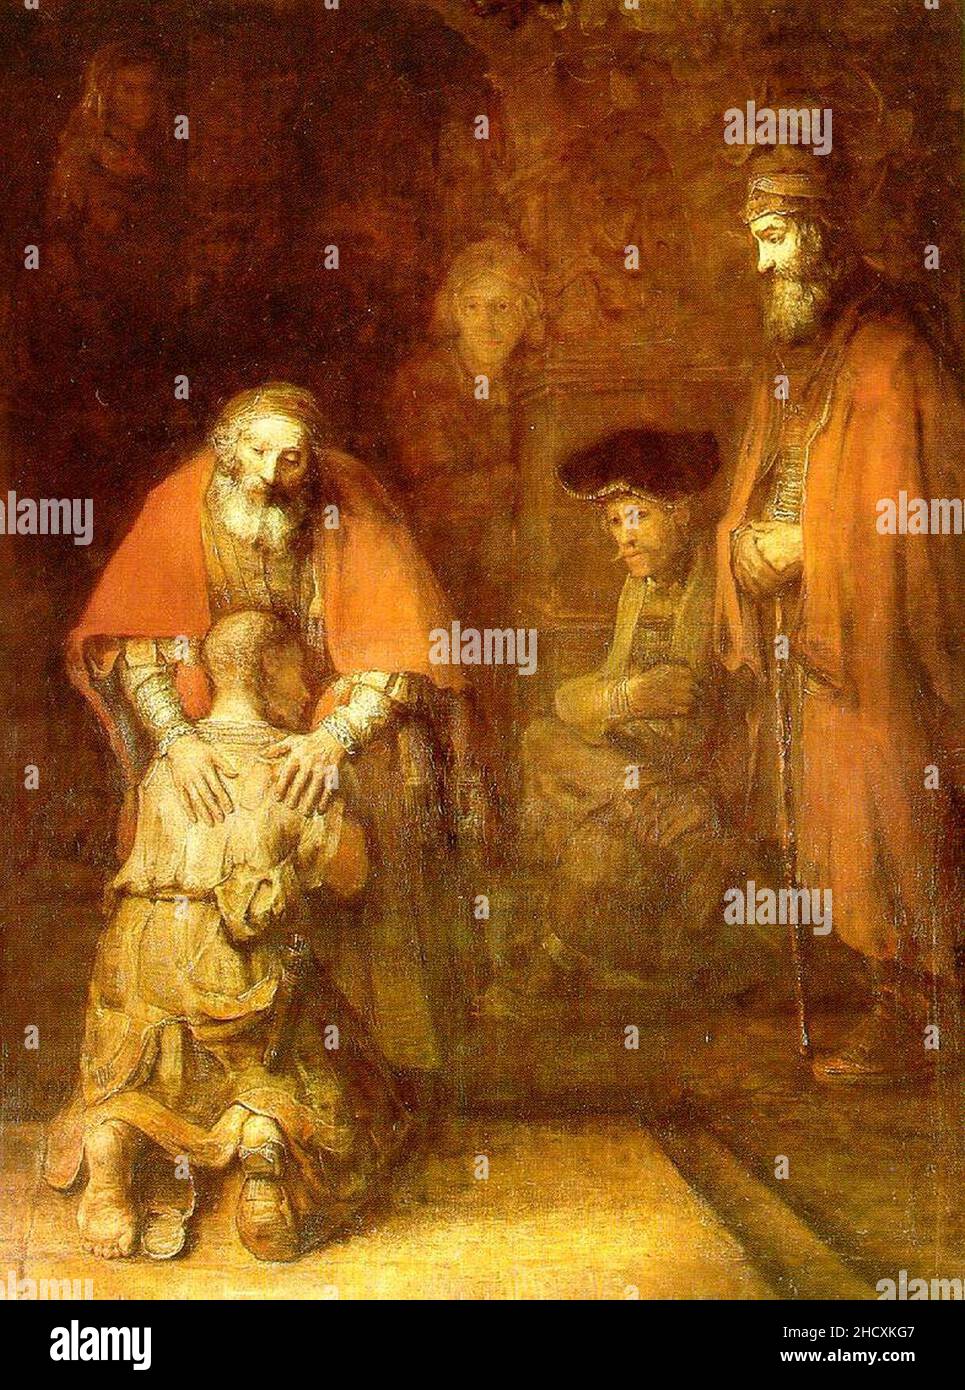 Rembrandt-The return of the prodigal son. Stock Photo